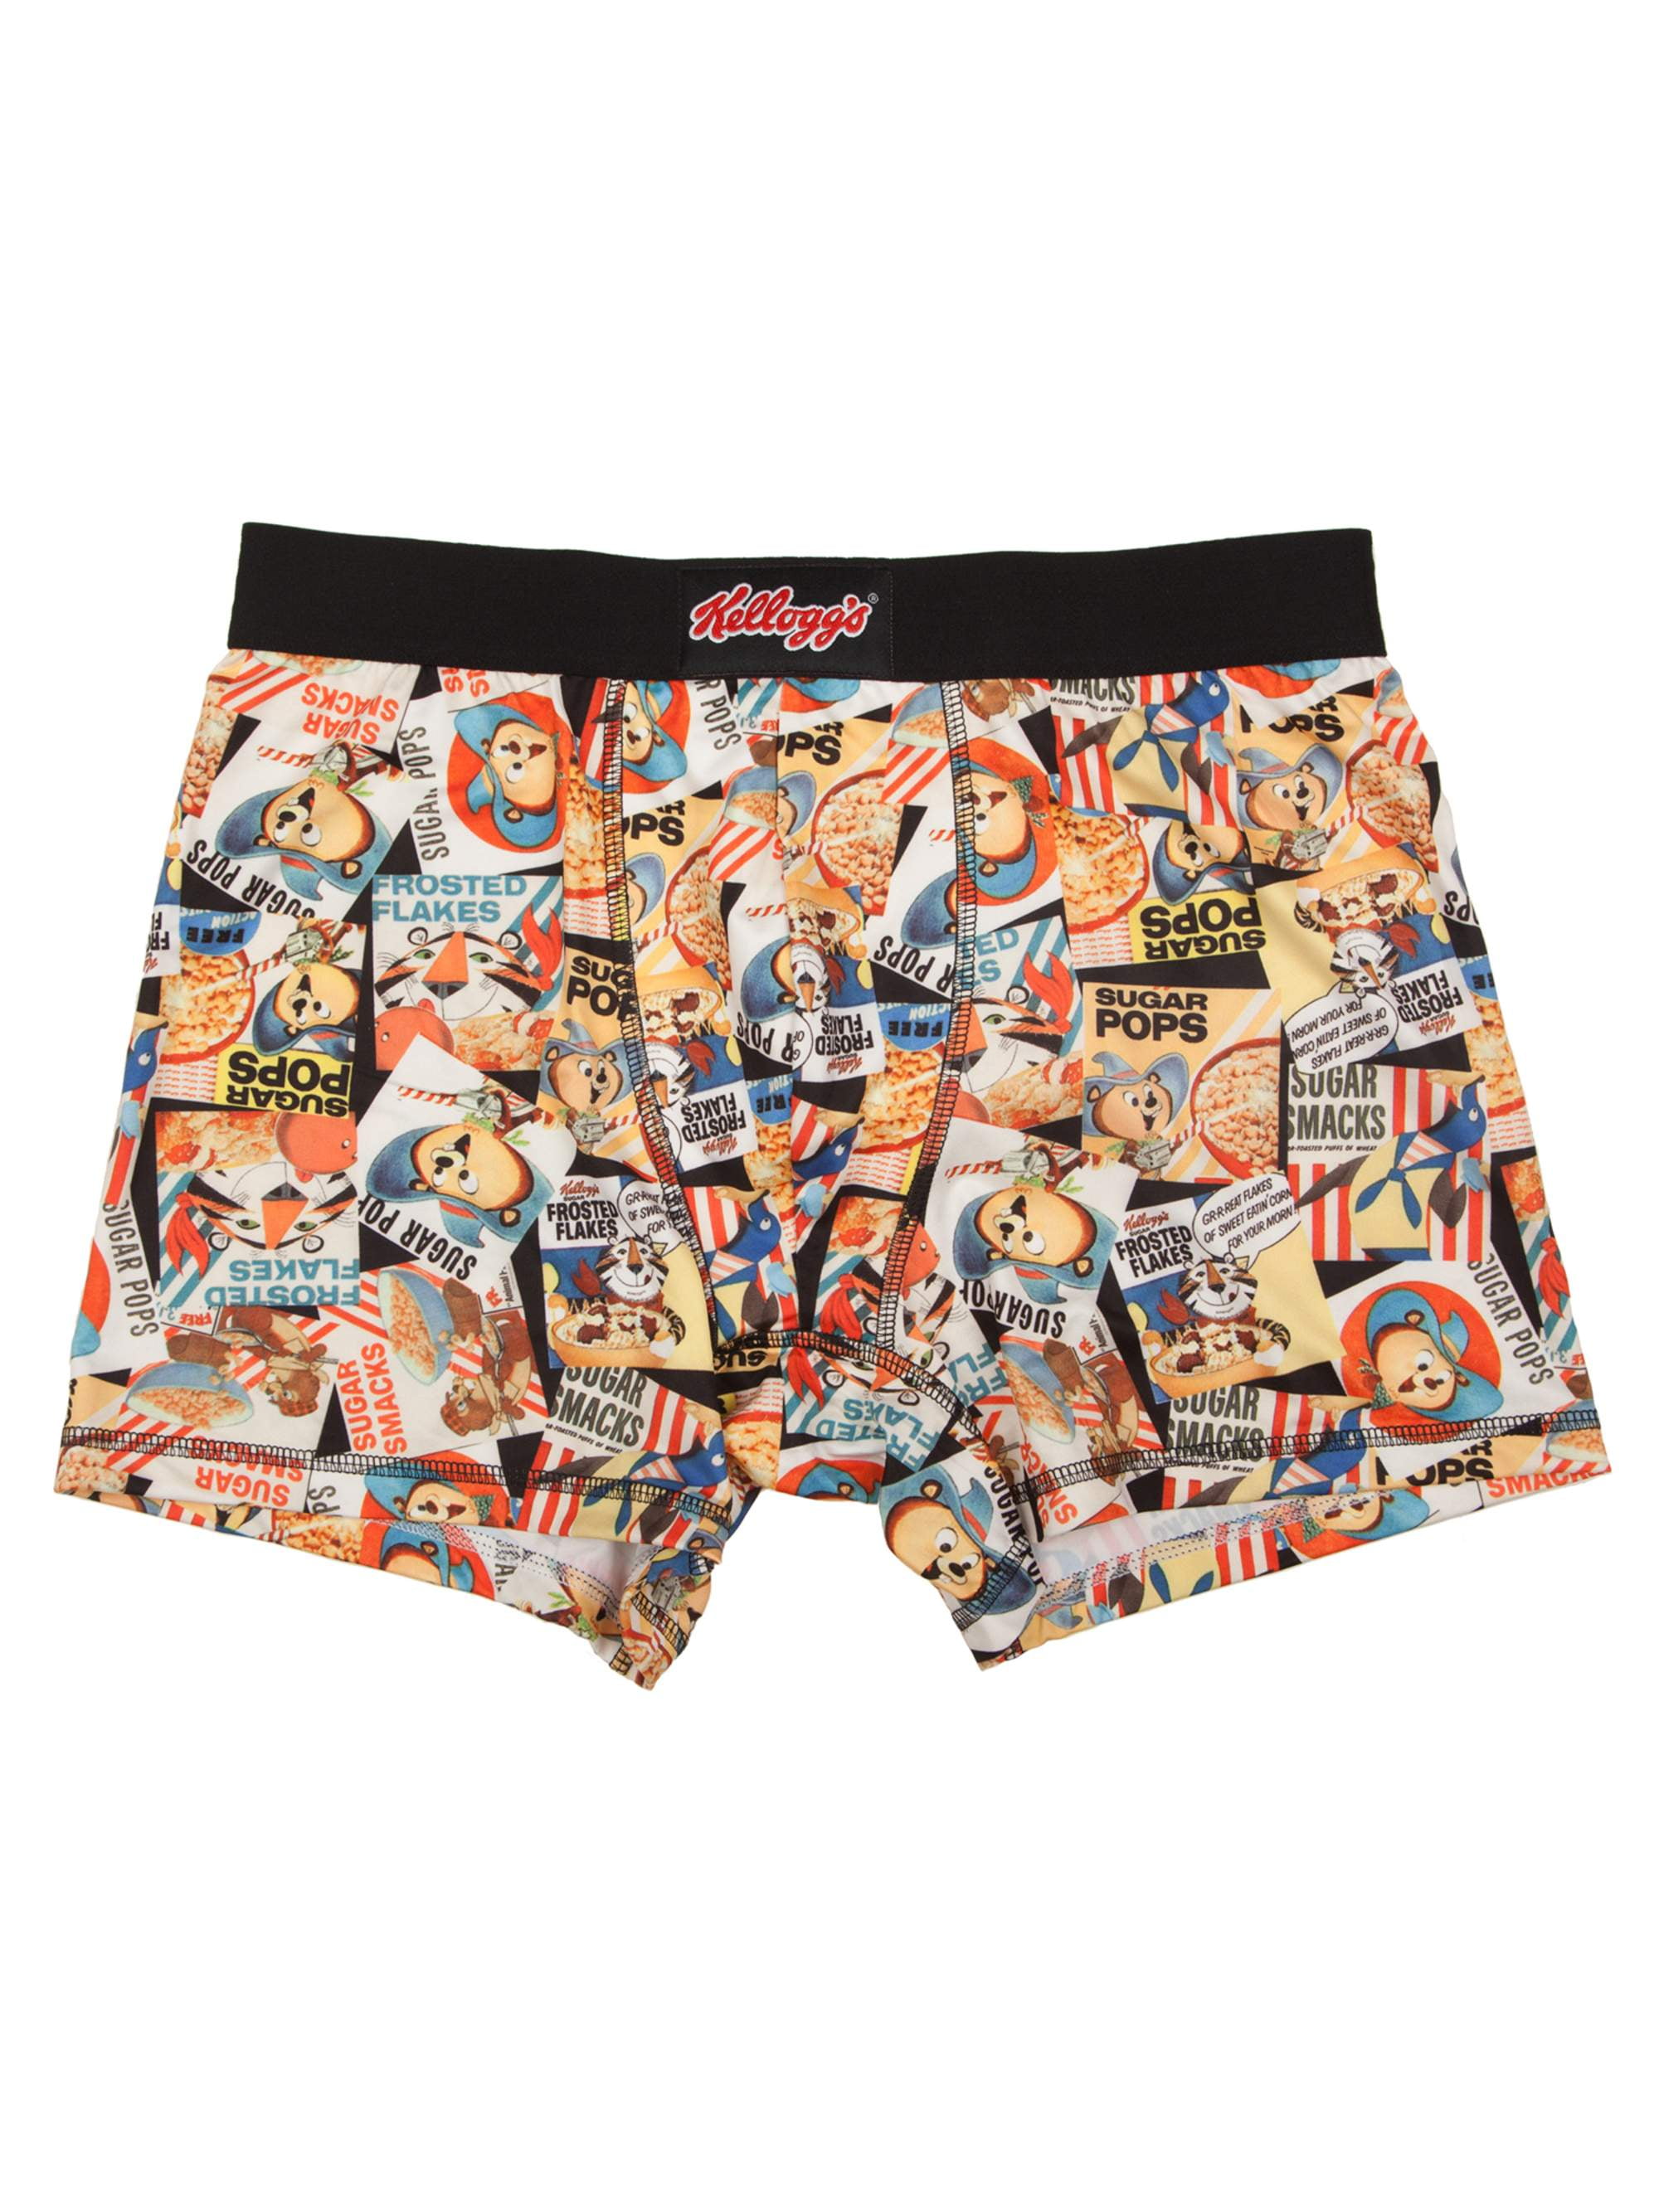 Men's Vintage Cereal Box All Over Print Poly Boxer Brief